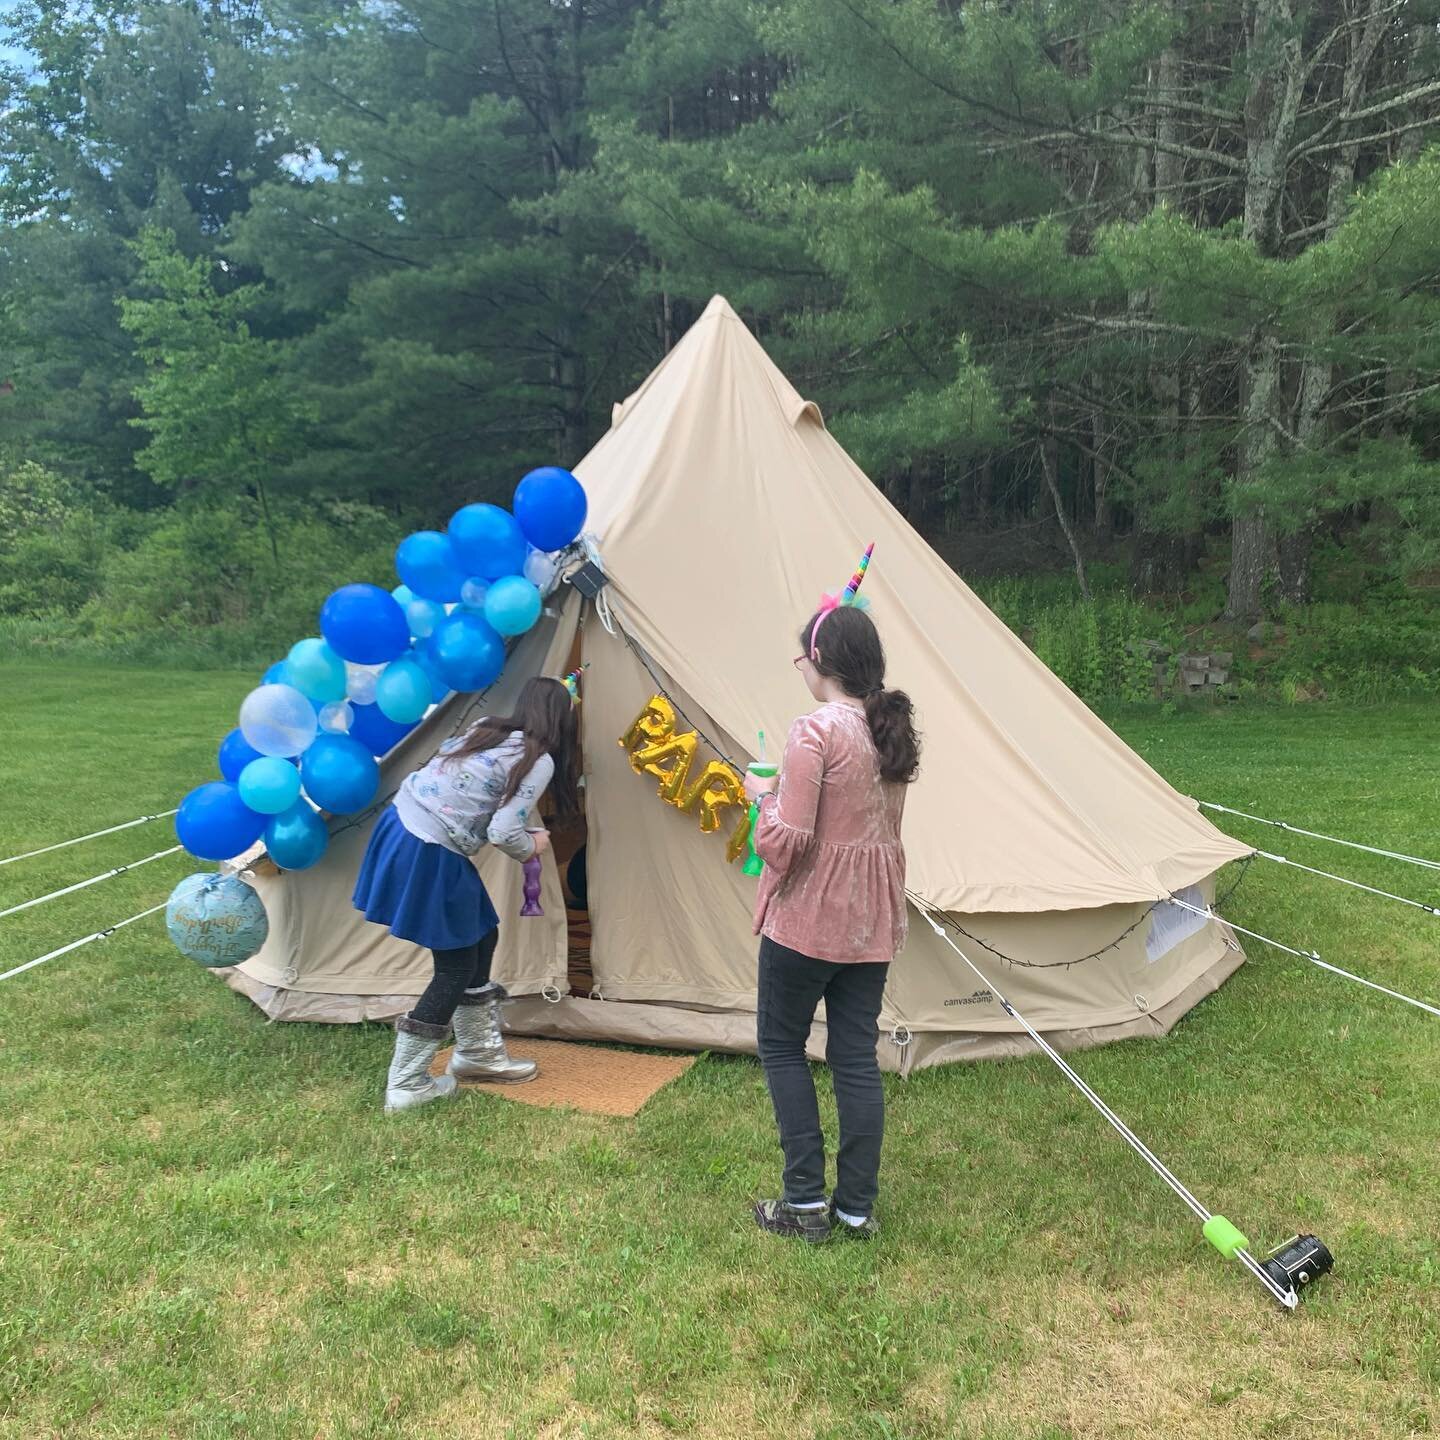 Birthdays are #special. What are you doing to make a #unique experience for your loved one?  #glampstars #glampingnotcamping #birthday #party #belltent @canvascamp @glampstars